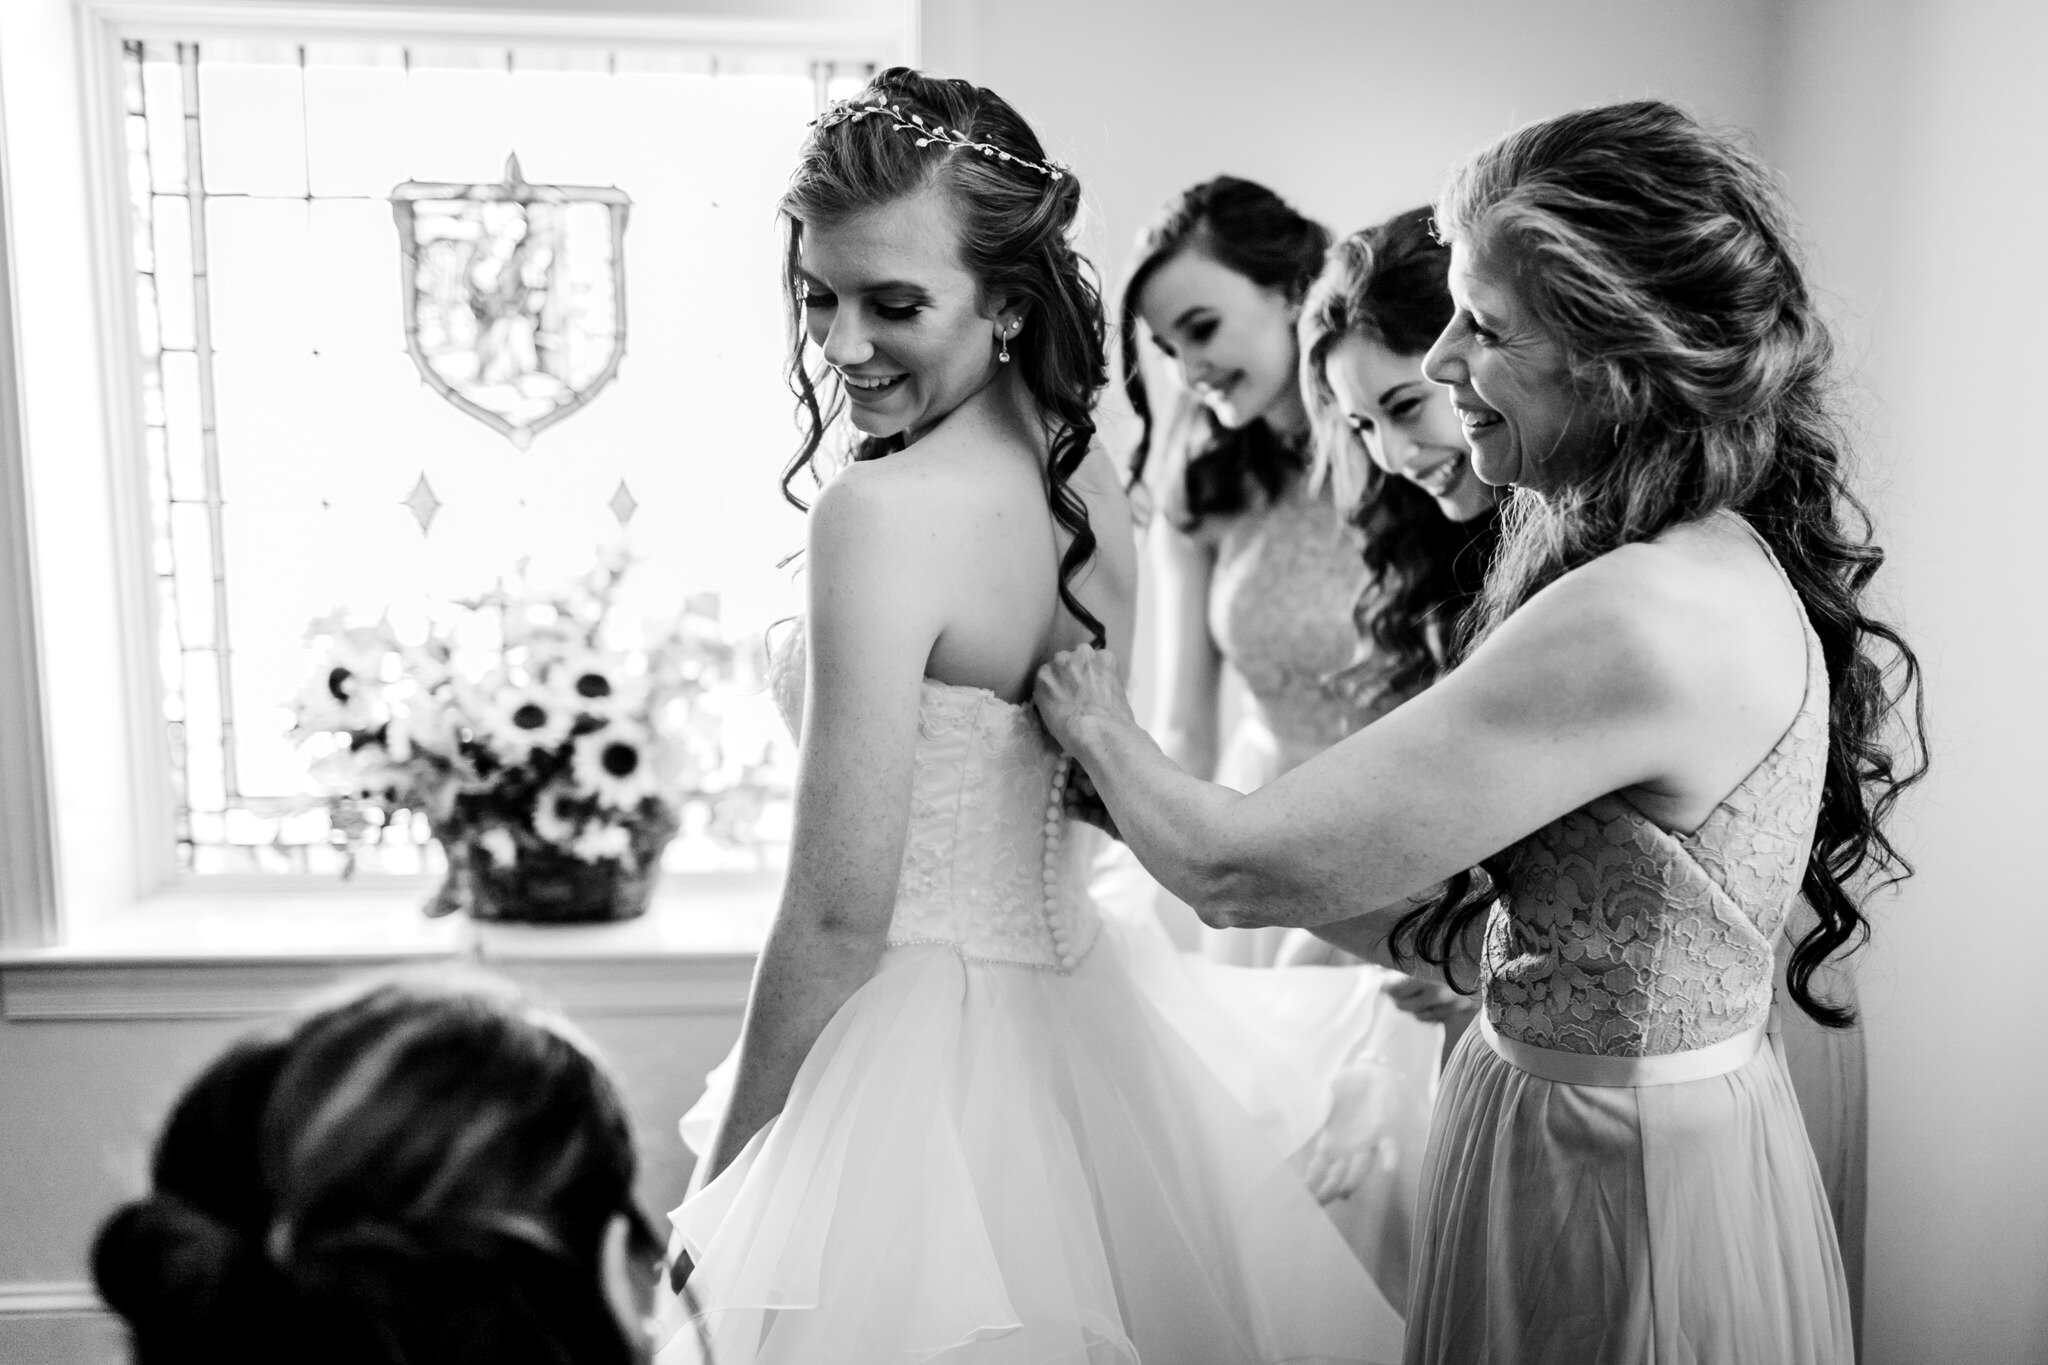 Durham Wedding Photographer | By G. Lin Photography | Mother of the bride zipping up bride